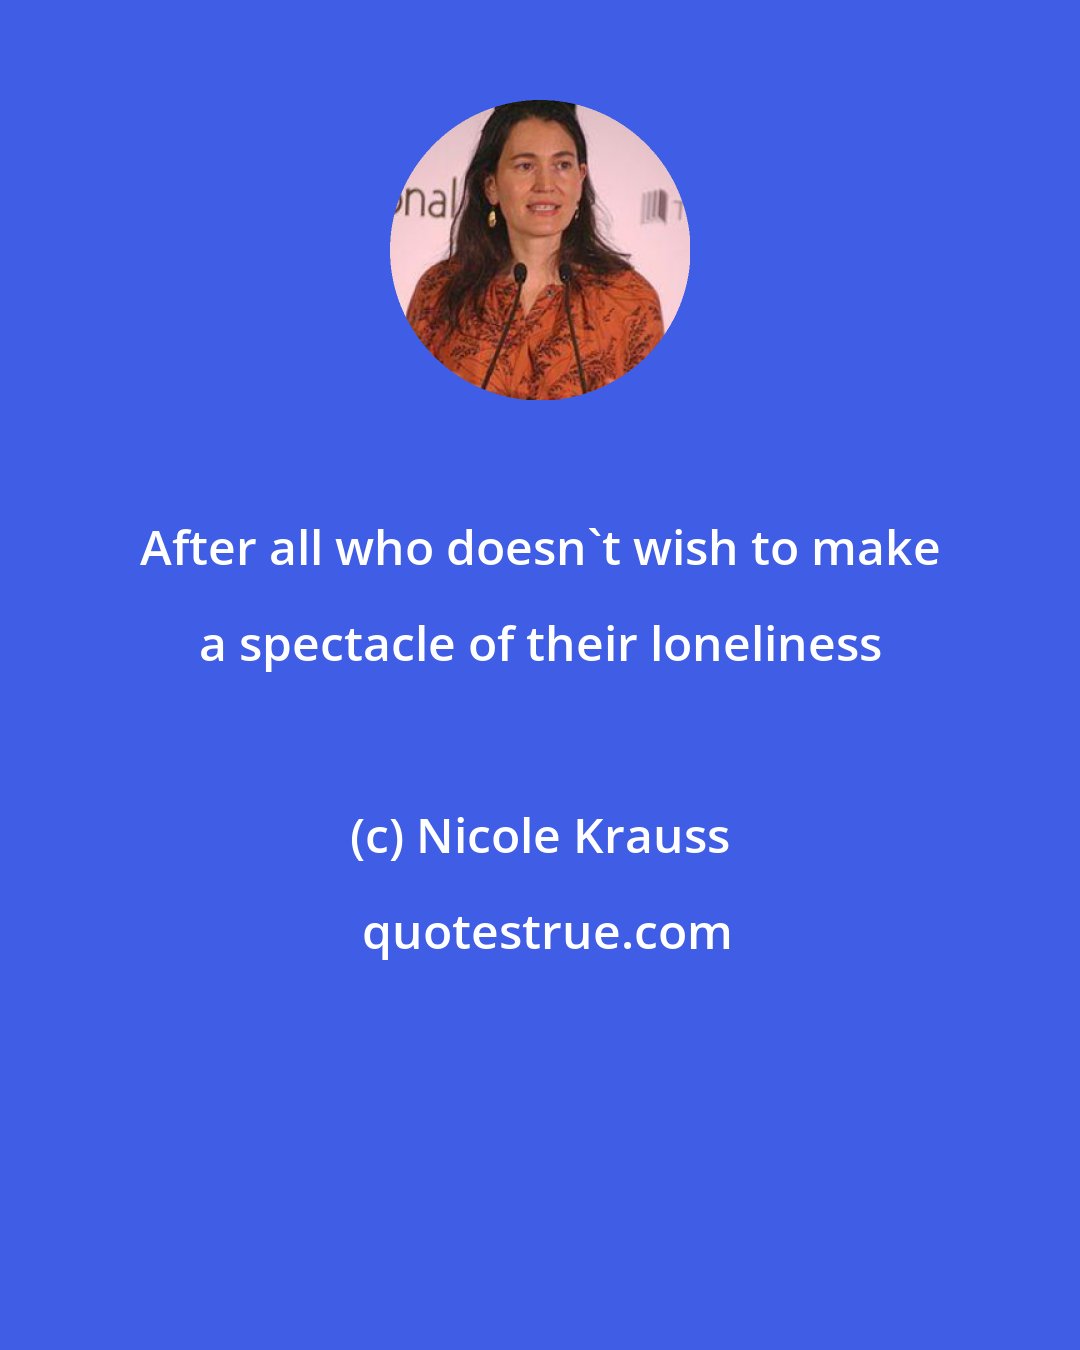 Nicole Krauss: After all who doesn't wish to make a spectacle of their loneliness